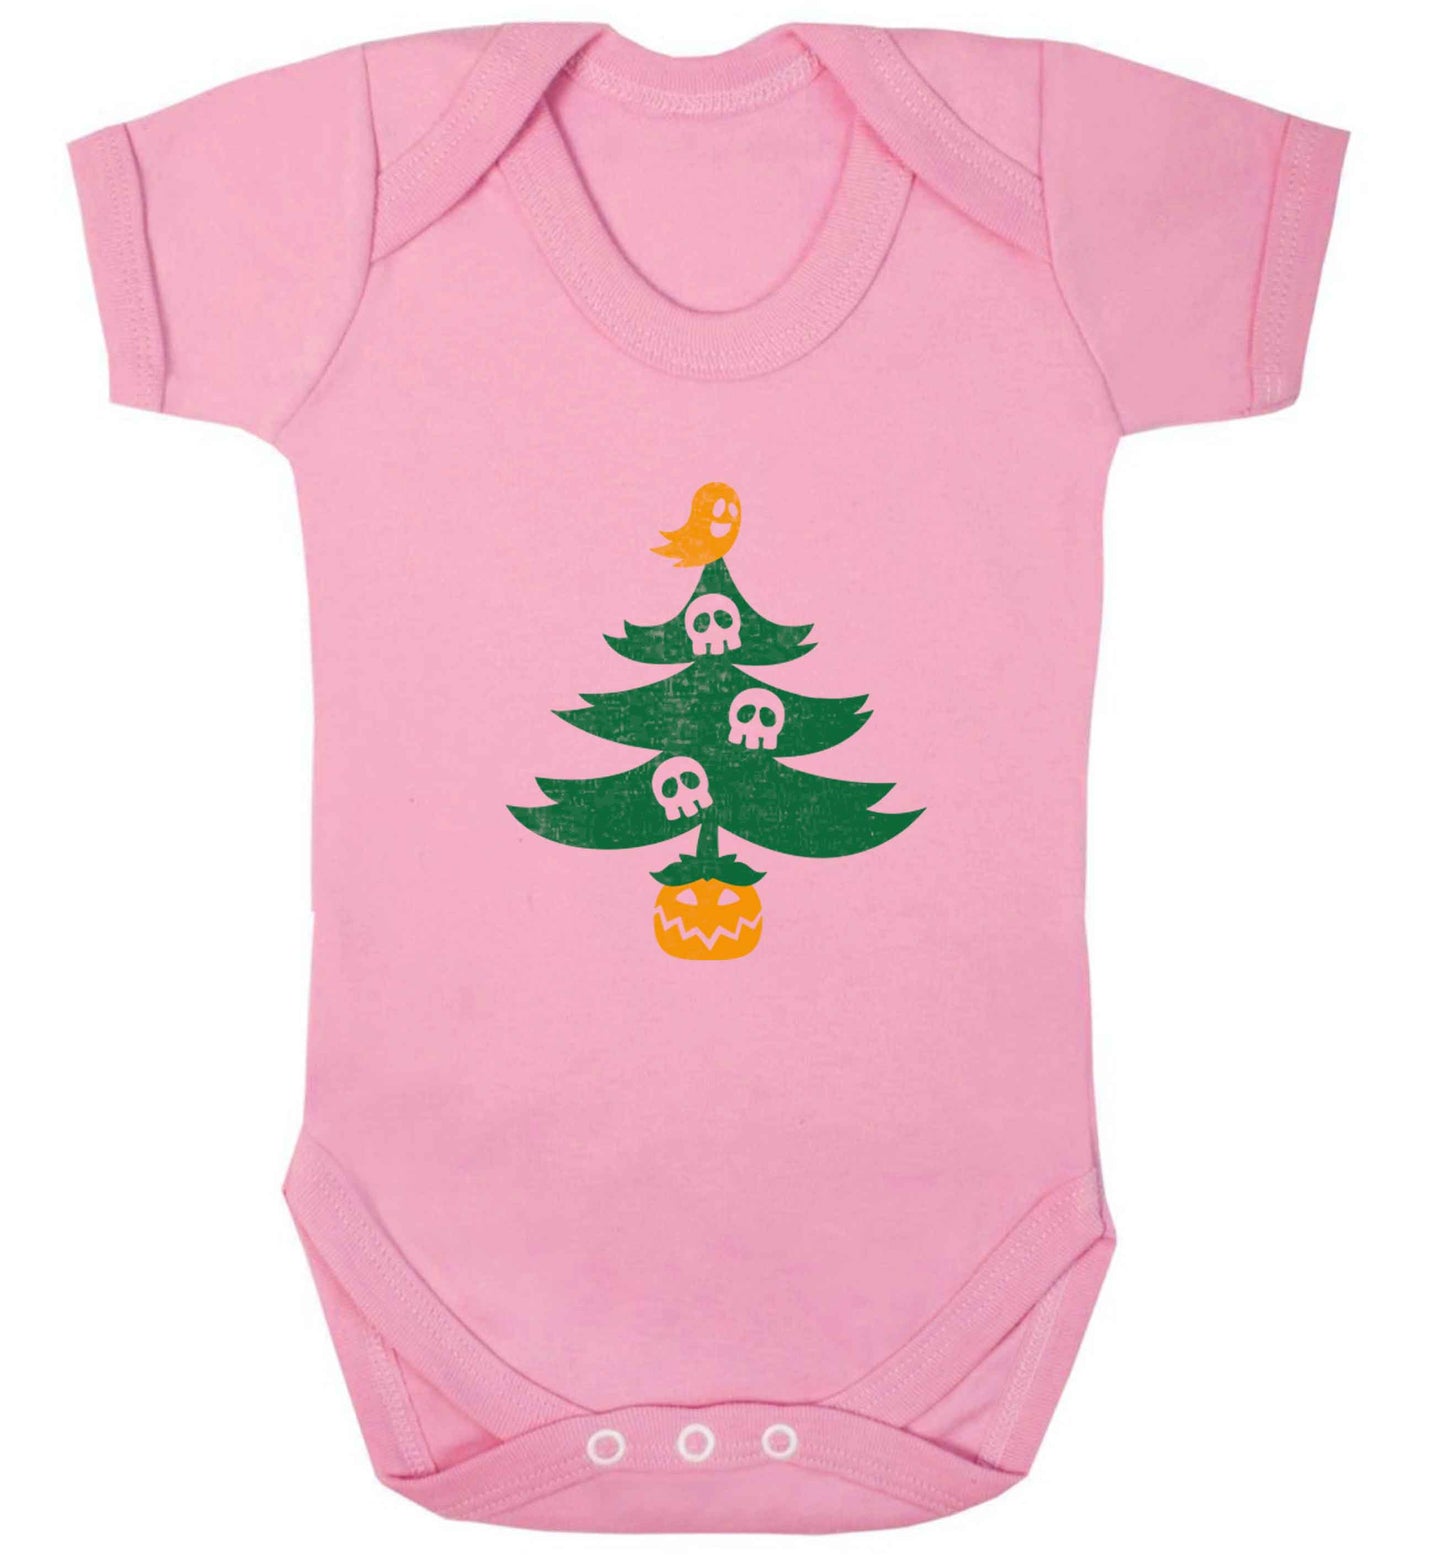 Halloween Christmas tree baby vest pale pink 18-24 months